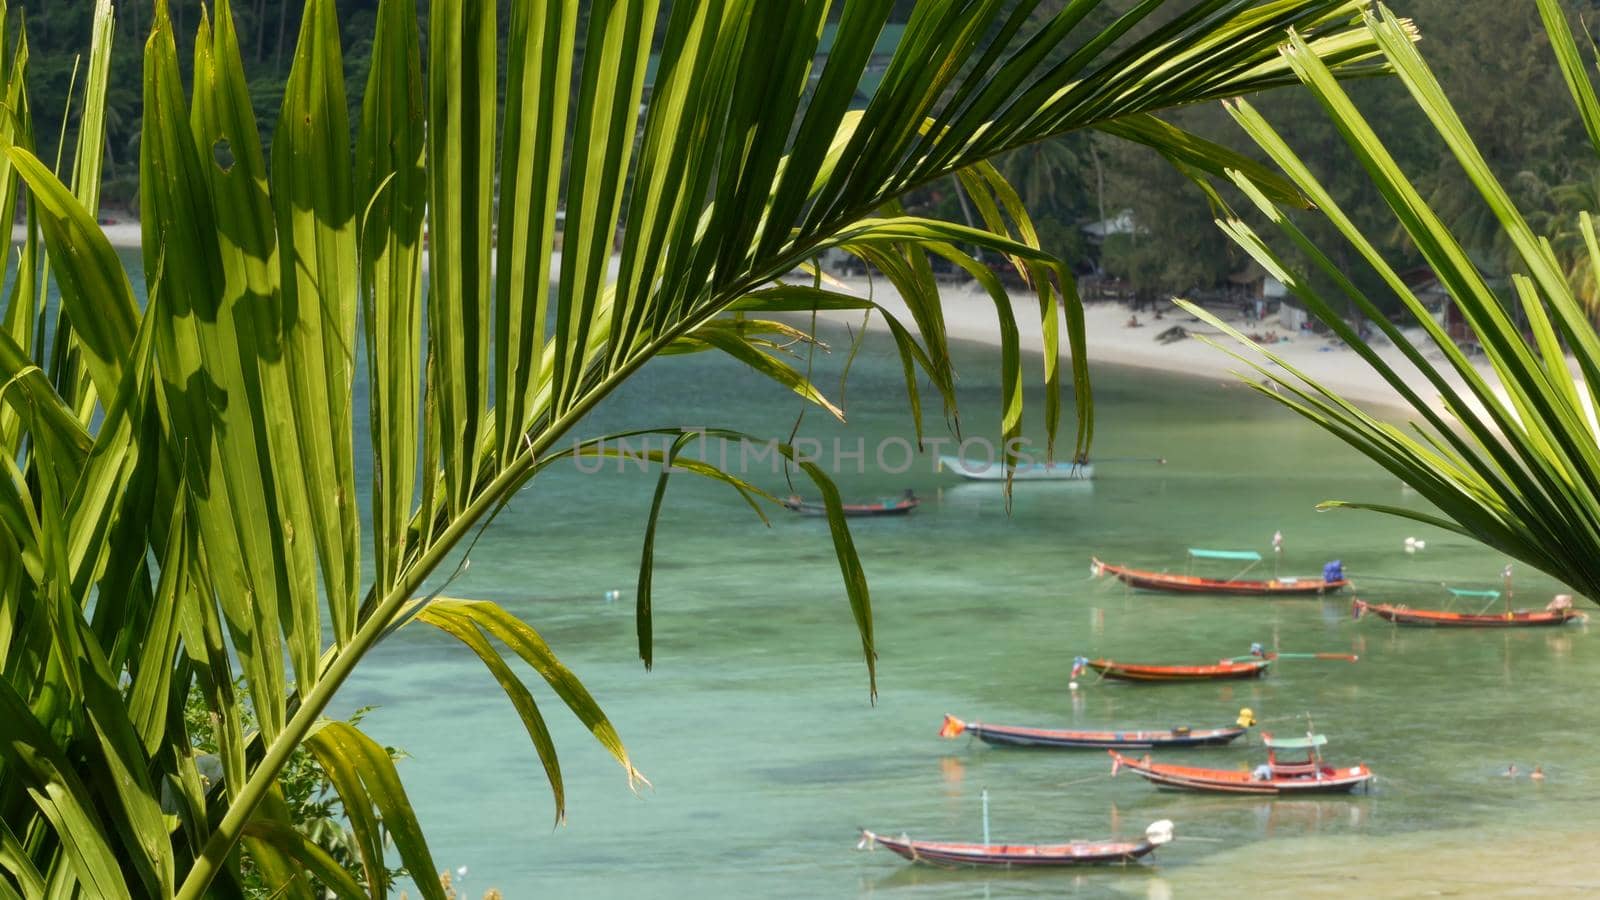 Boats near shore of island. Traditional colorful fishing vessels floating on calm blue water near white sand coast of tropical exotic paradise island. View through green palm leaves. Koh Phangan.